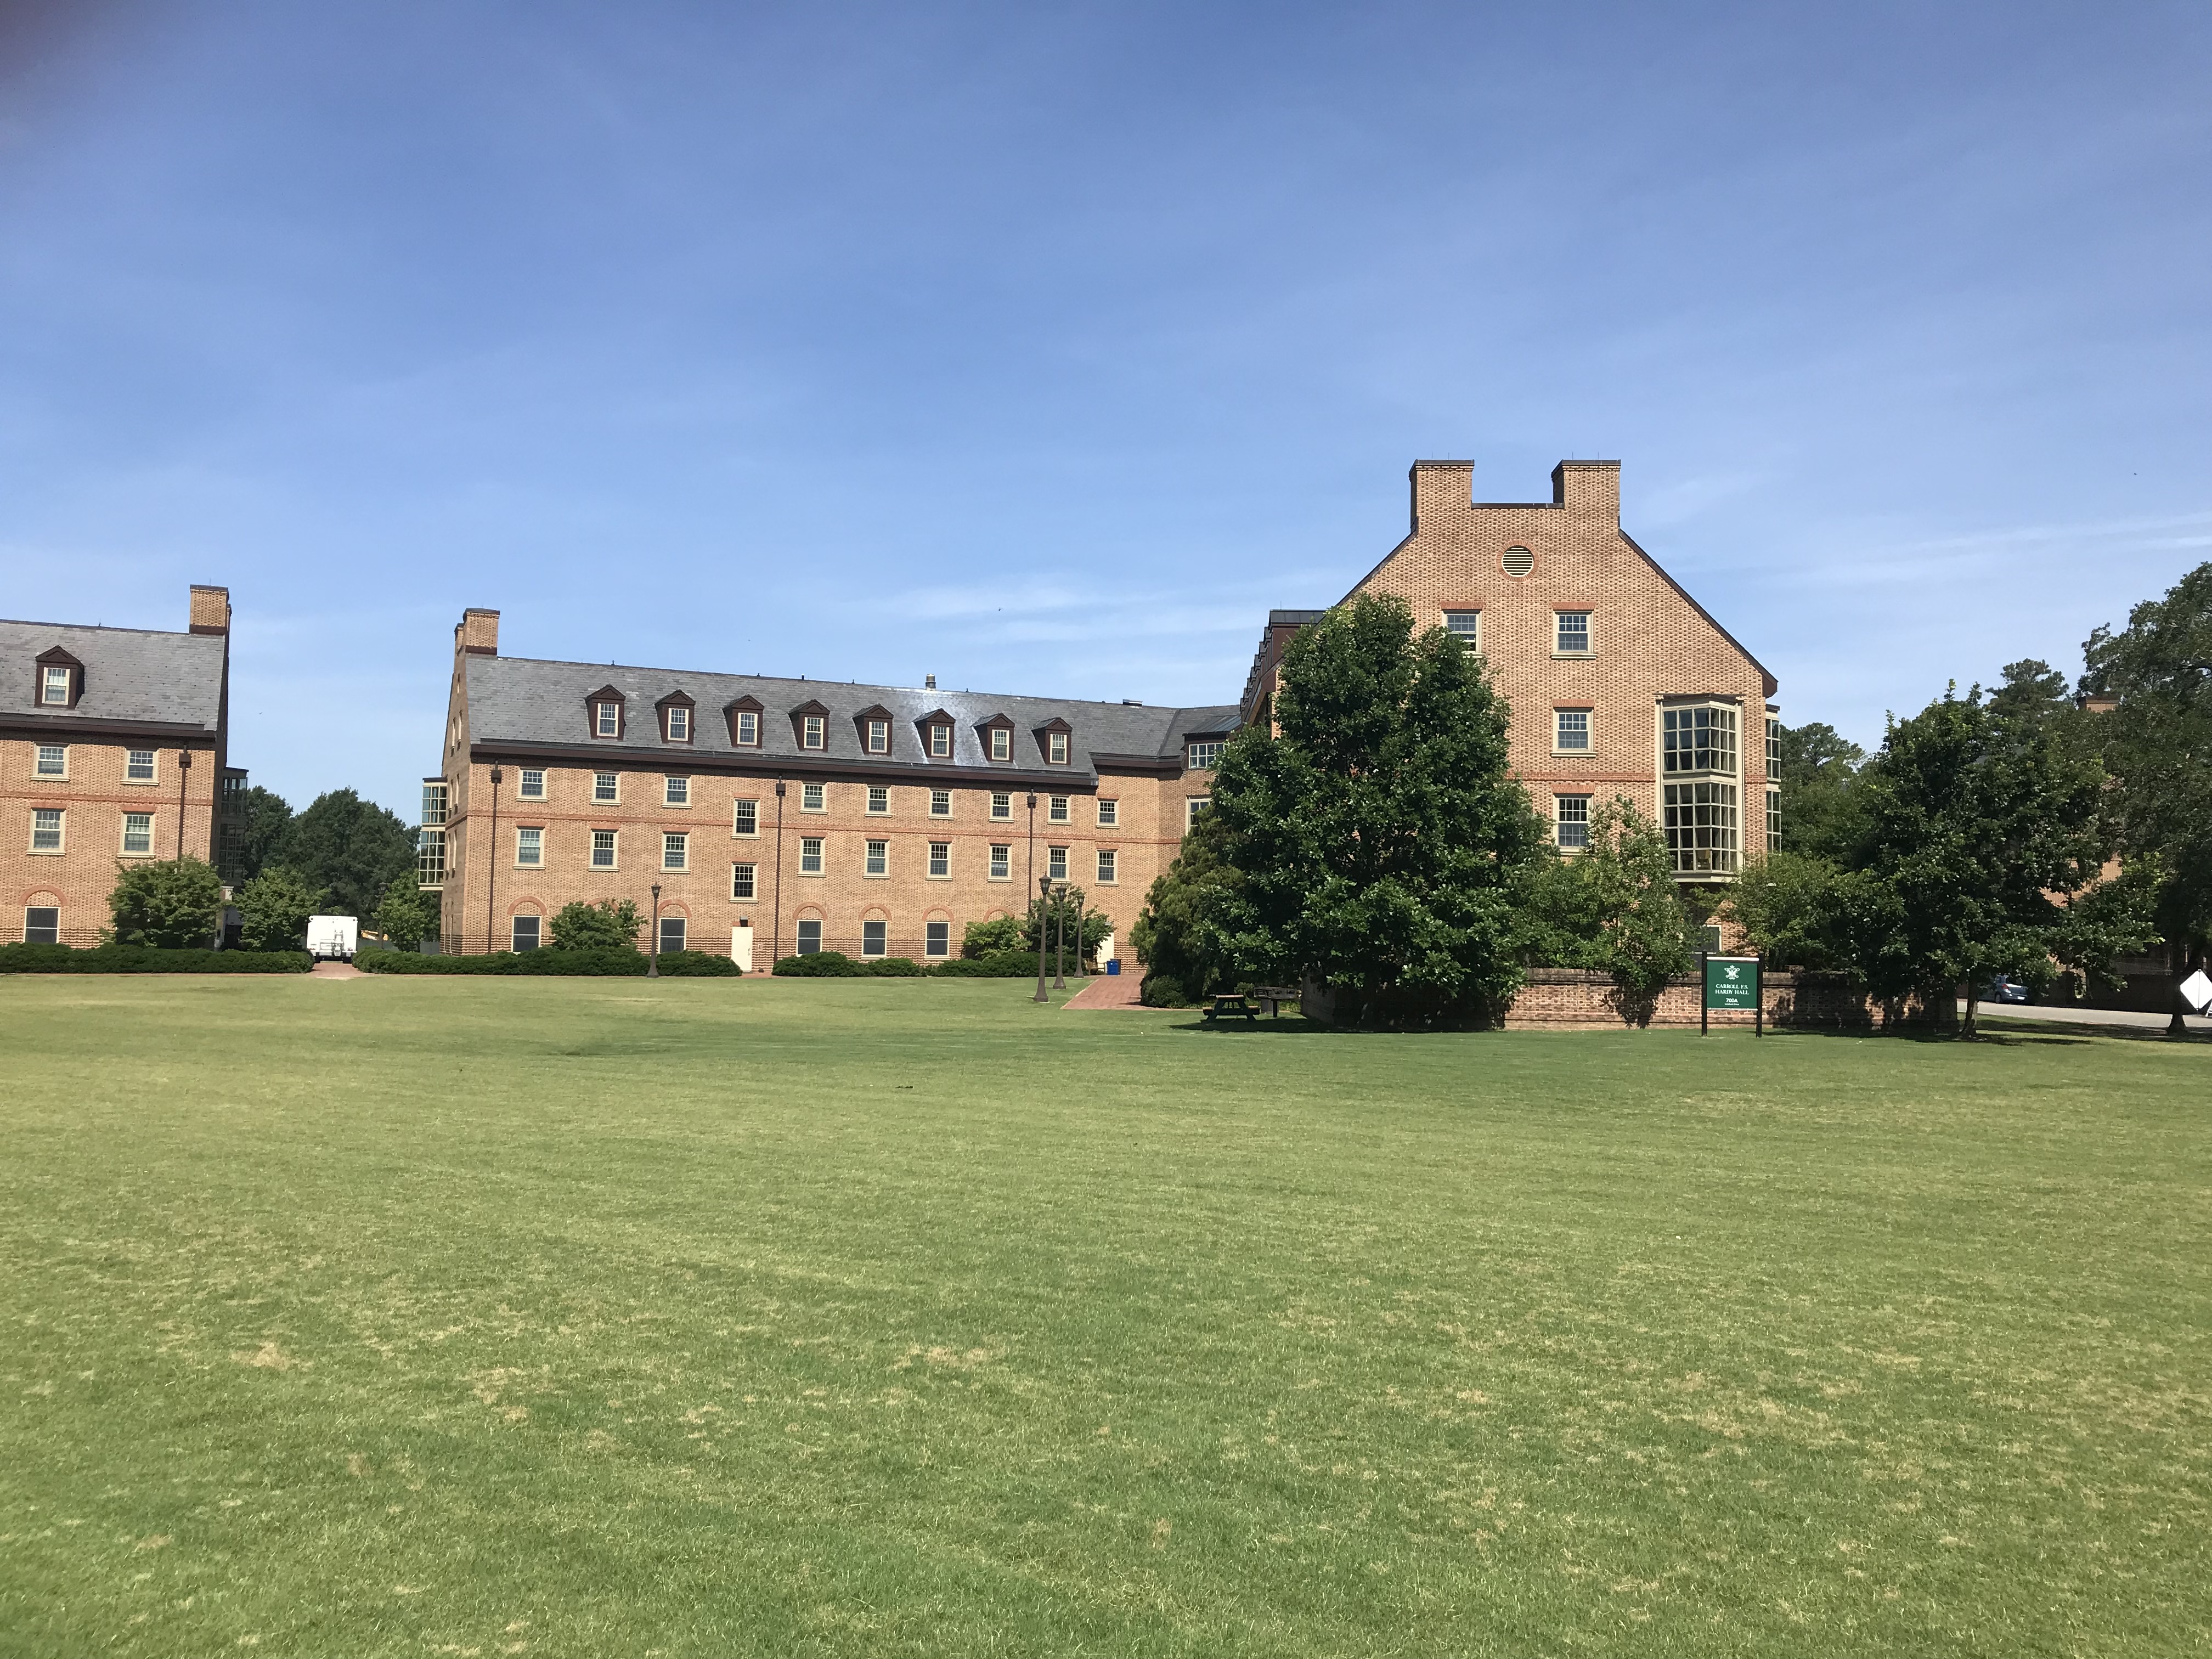 view of dorm from field behind